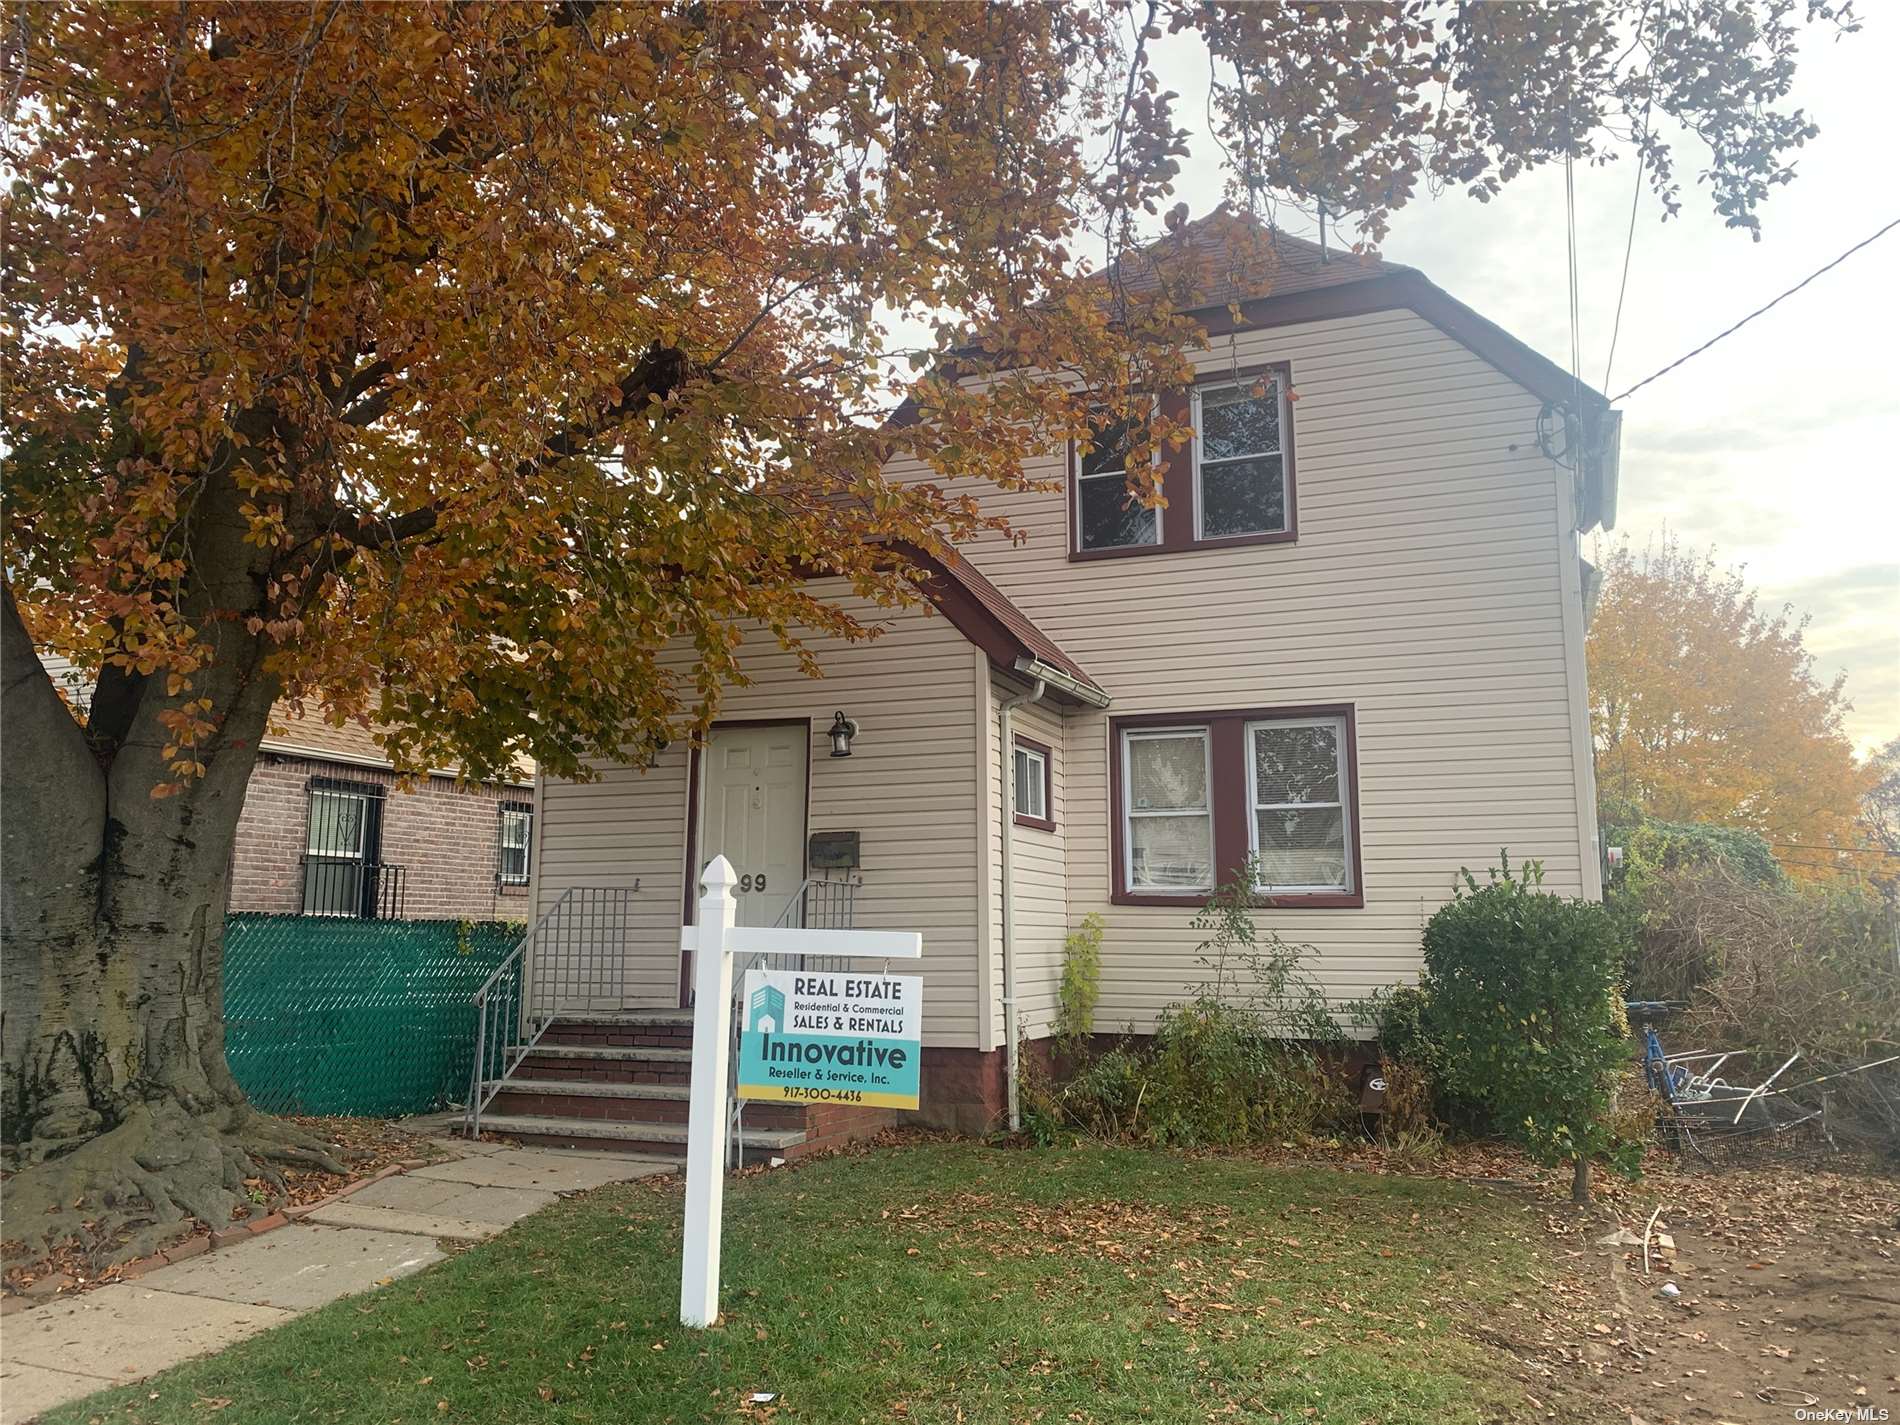 Single Family in Laurelton - 222nd  Queens, NY 11413